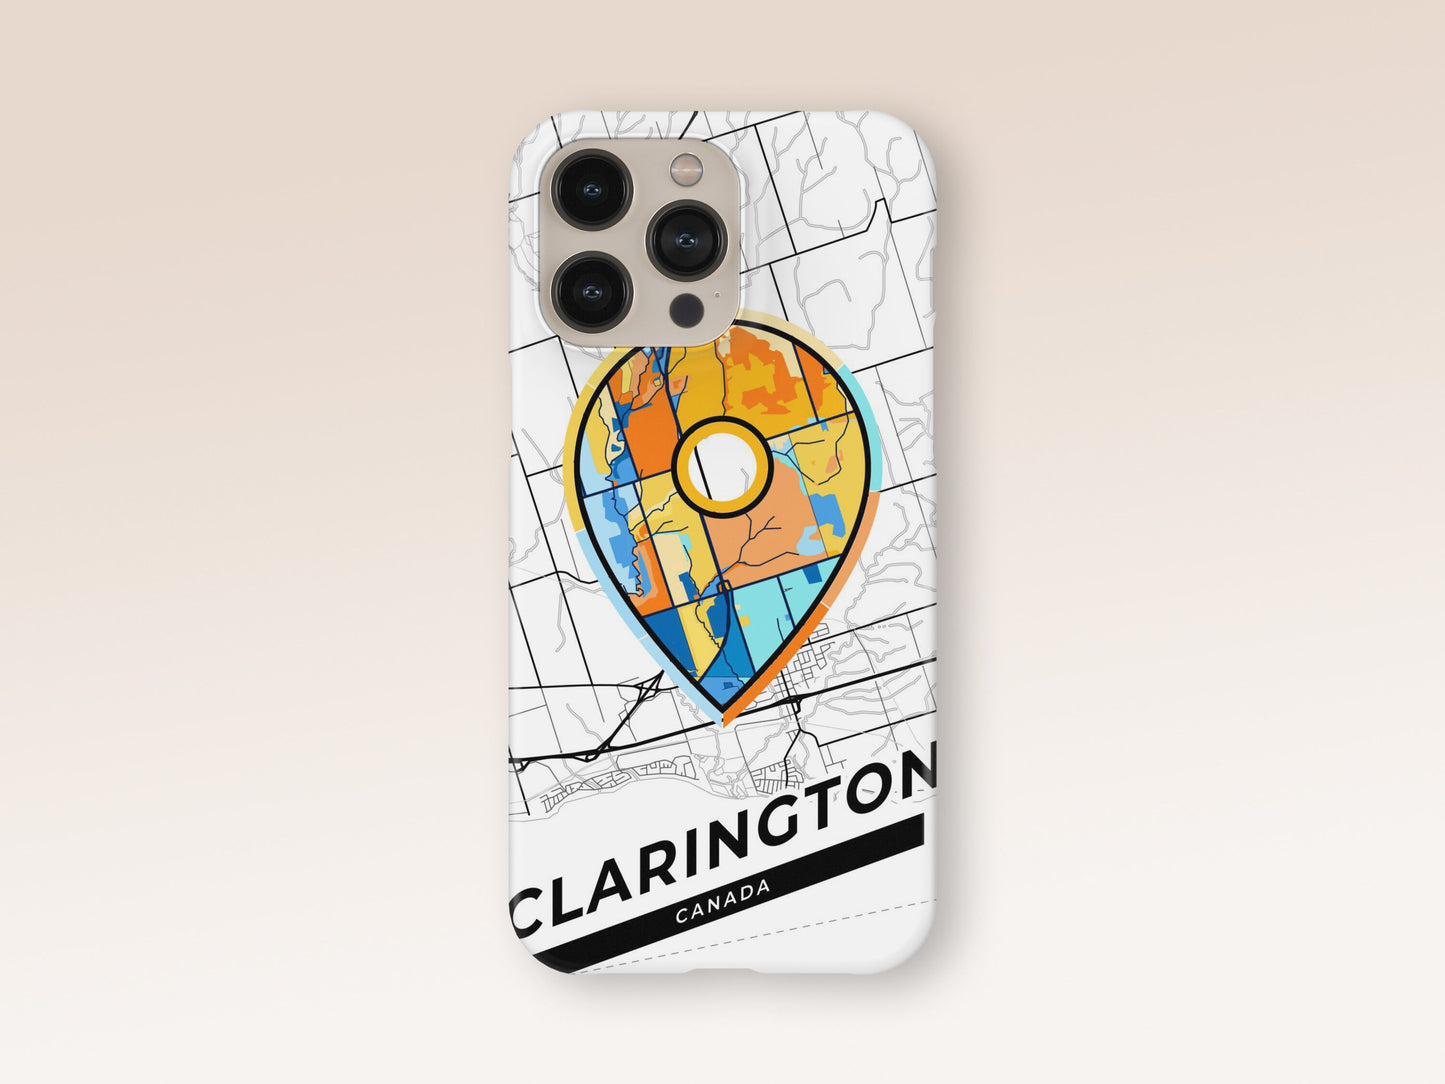 Clarington Canada slim phone case with colorful icon. Birthday, wedding or housewarming gift. Couple match cases. 1